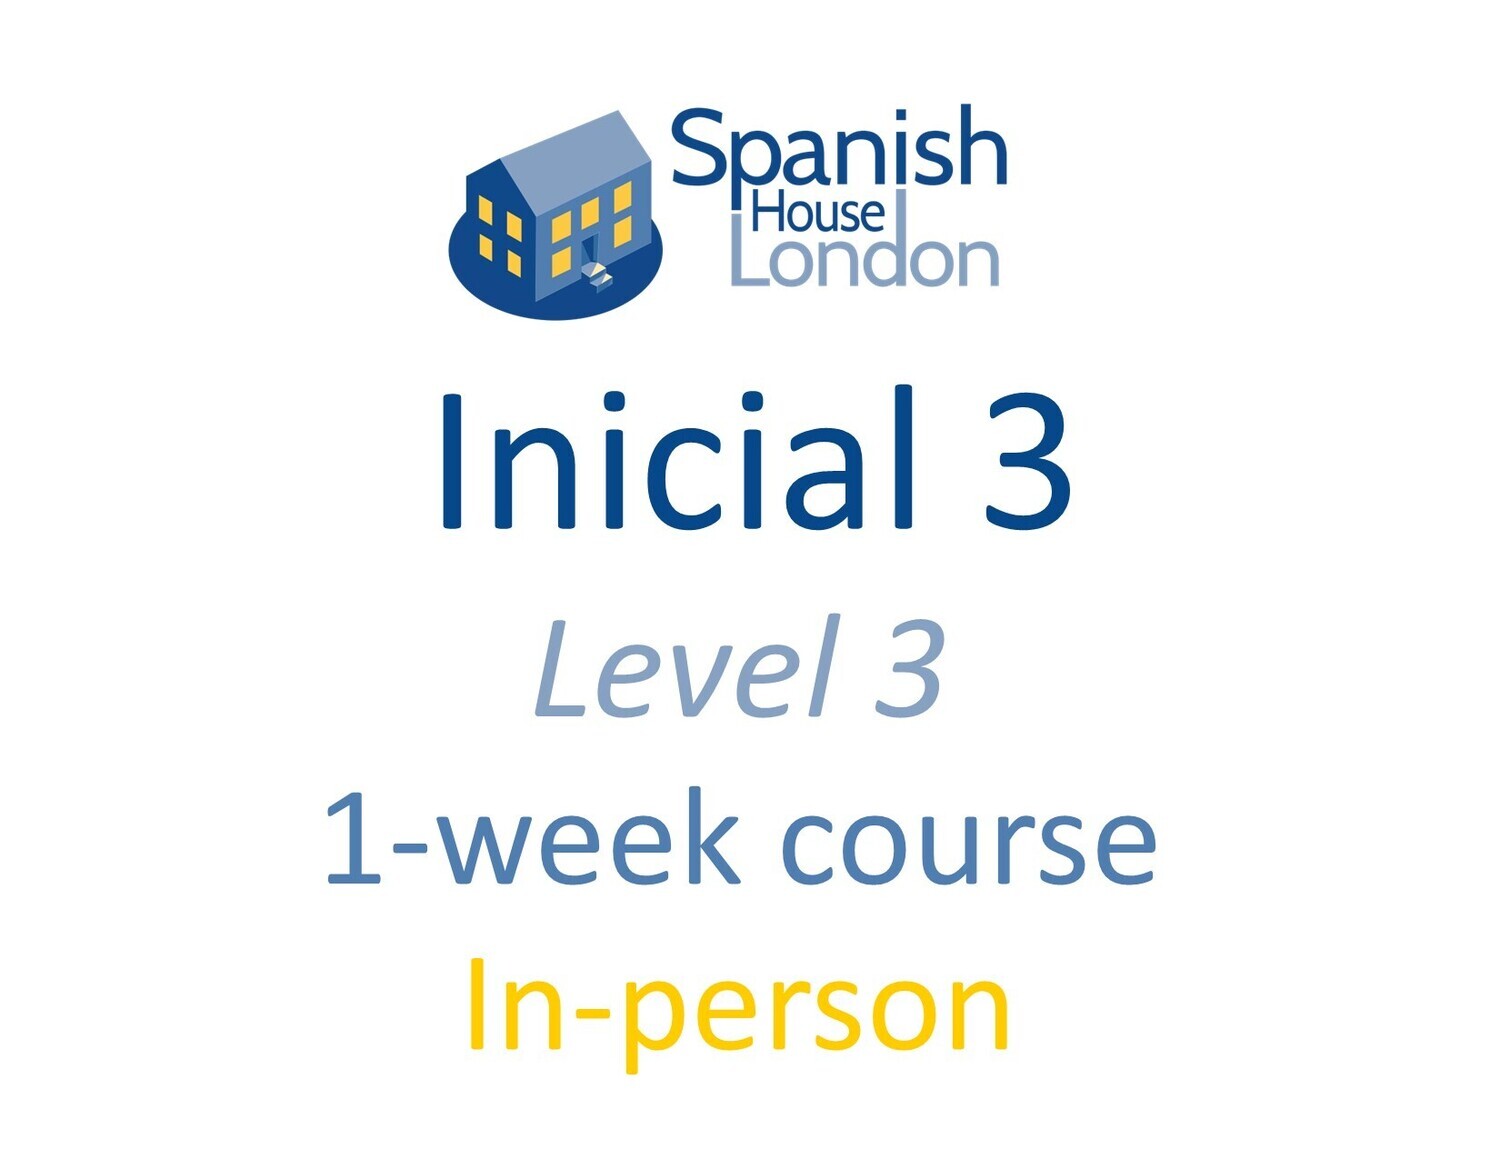 One-Week Intensive Inicial 3 Course starting on 15th May at 10.30am in Clapham North